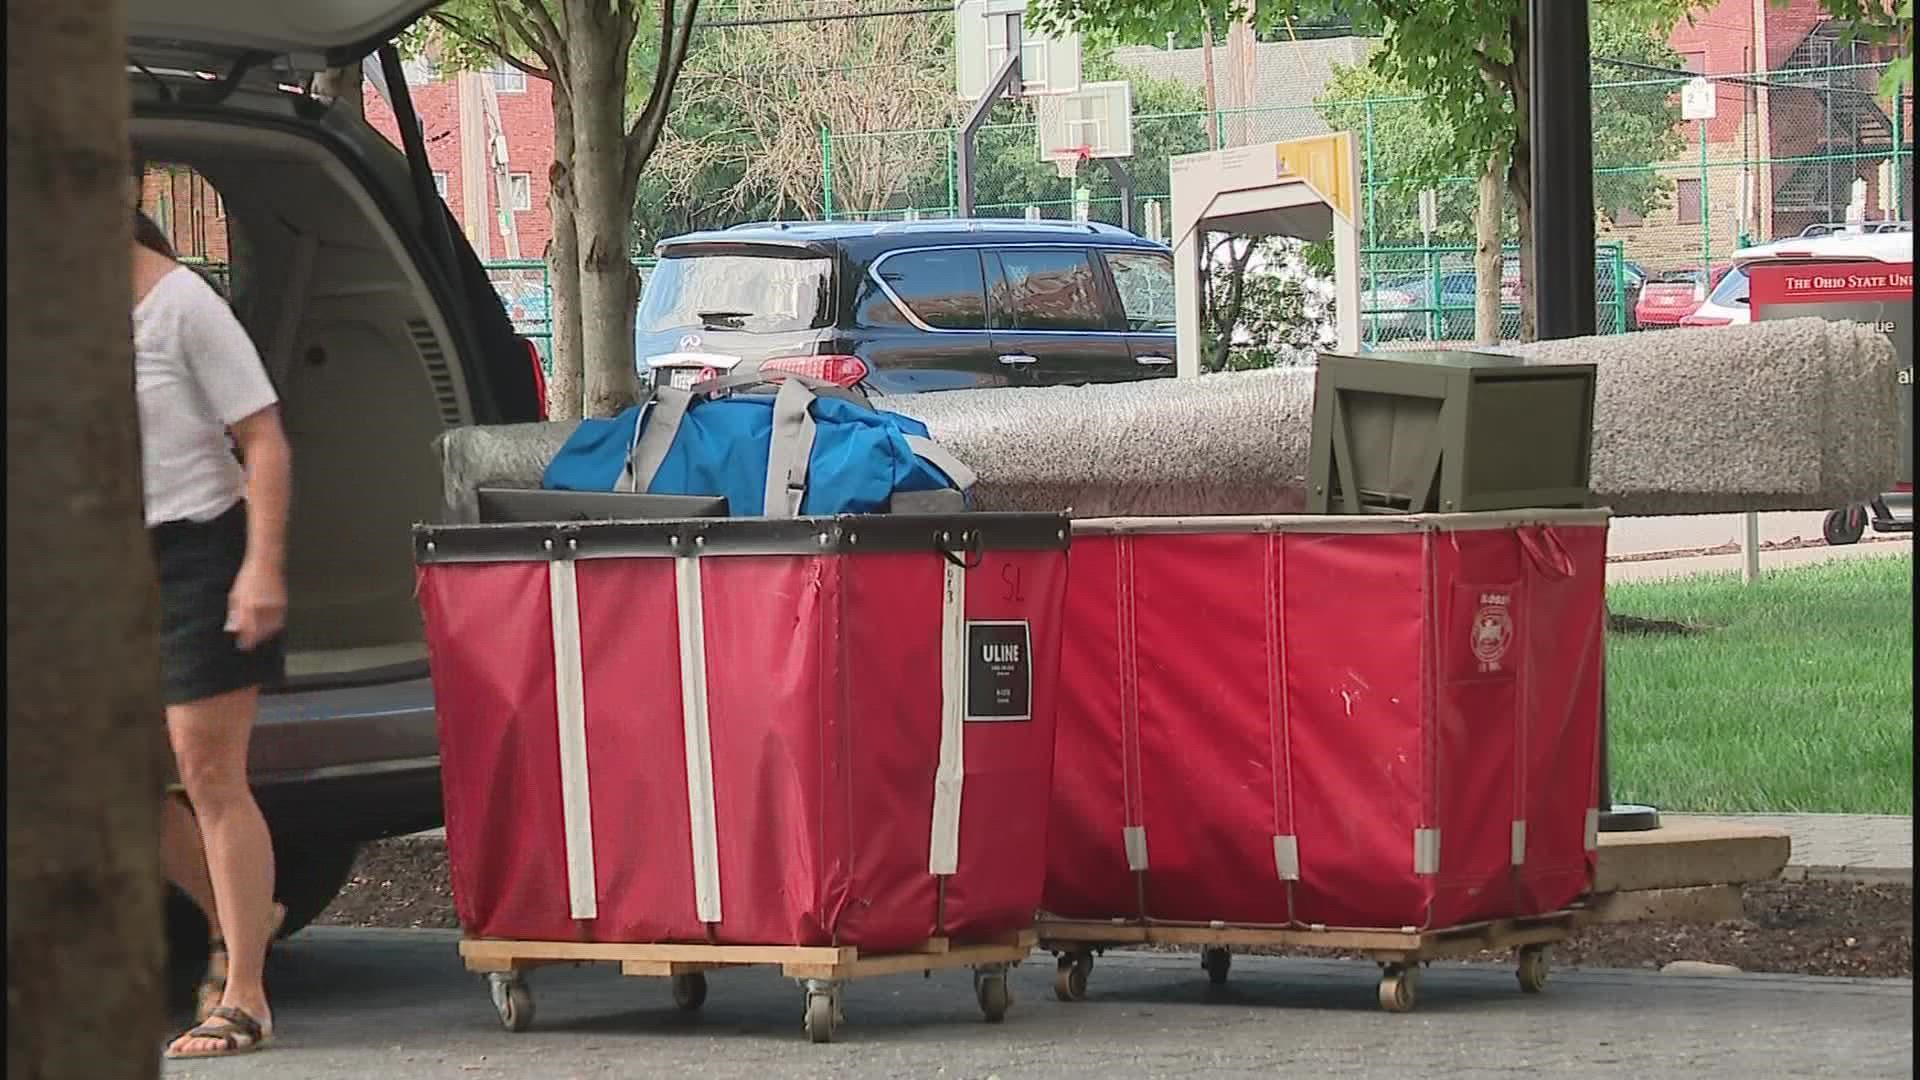 It's move-in week for freshmen at The Ohio State University and surrounding businesses are excited about the return of school and all of its students.